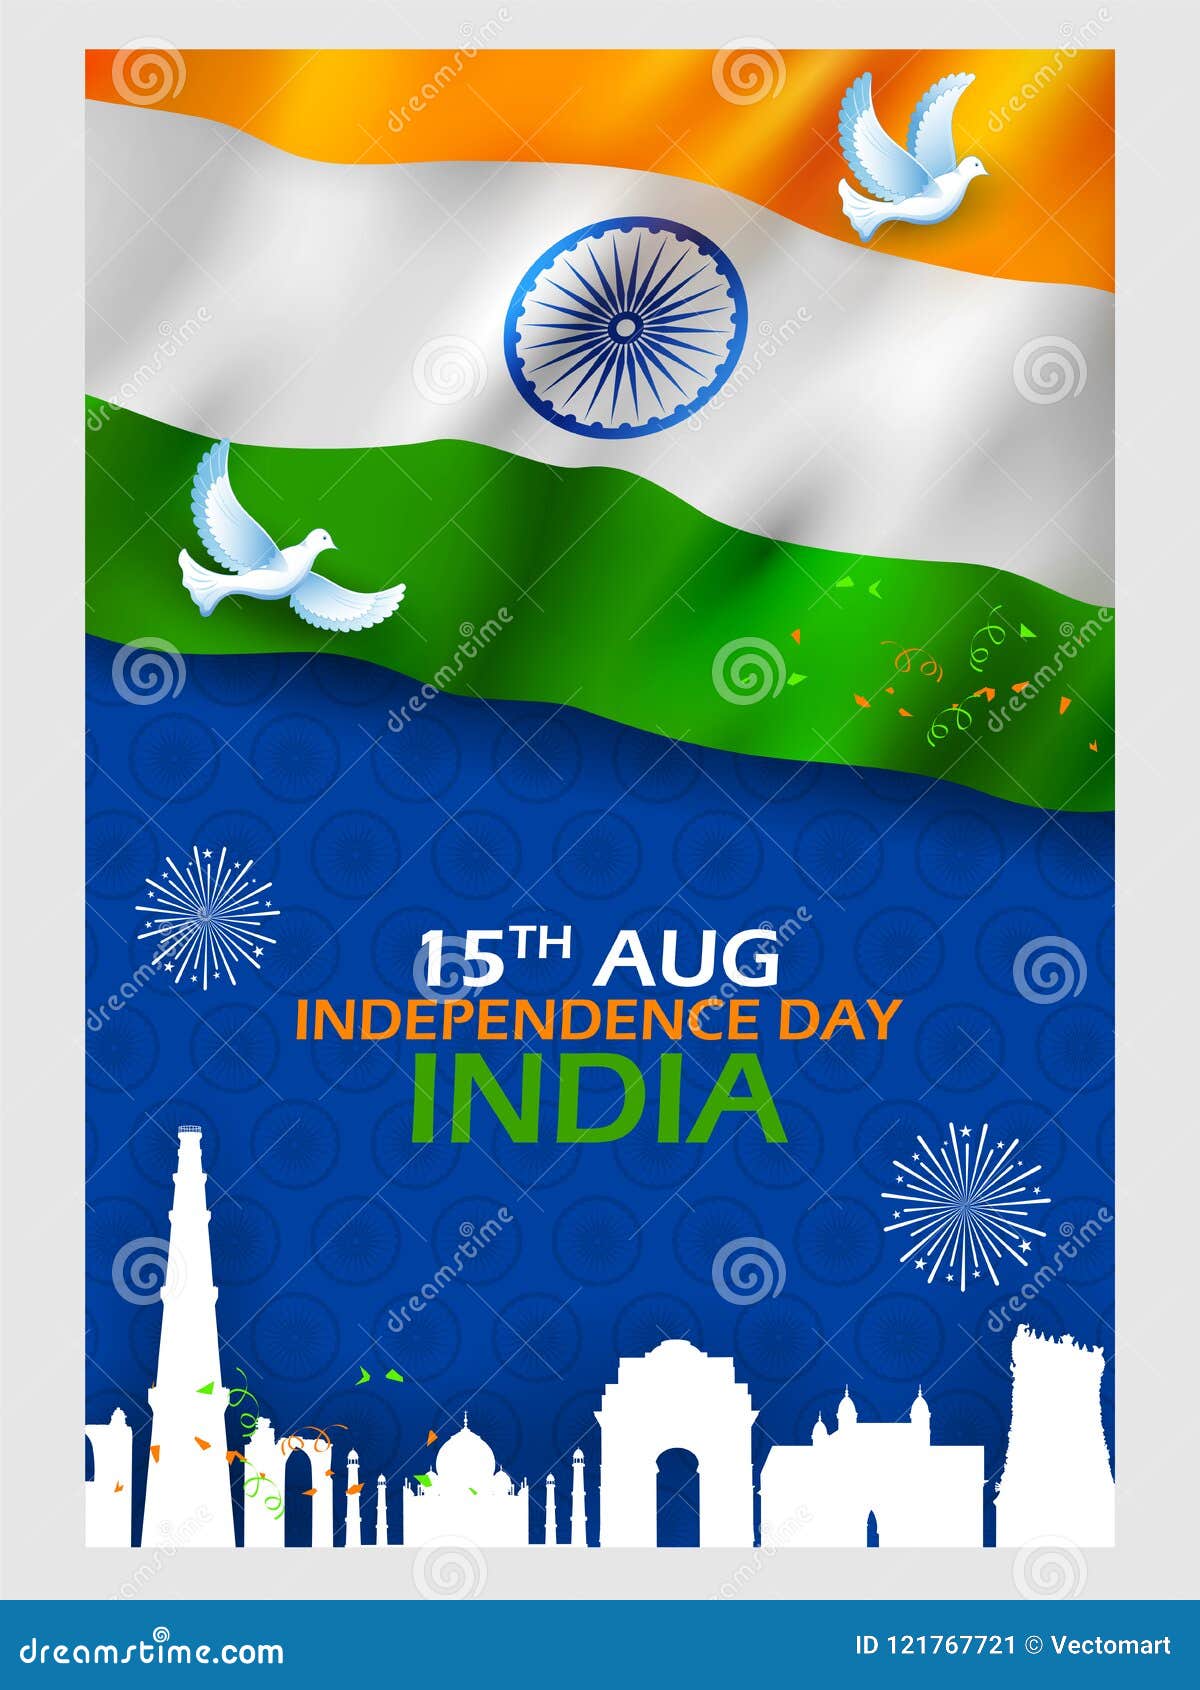 India Independence Day Celebration On 15 August With Lal Kila Bacground ...